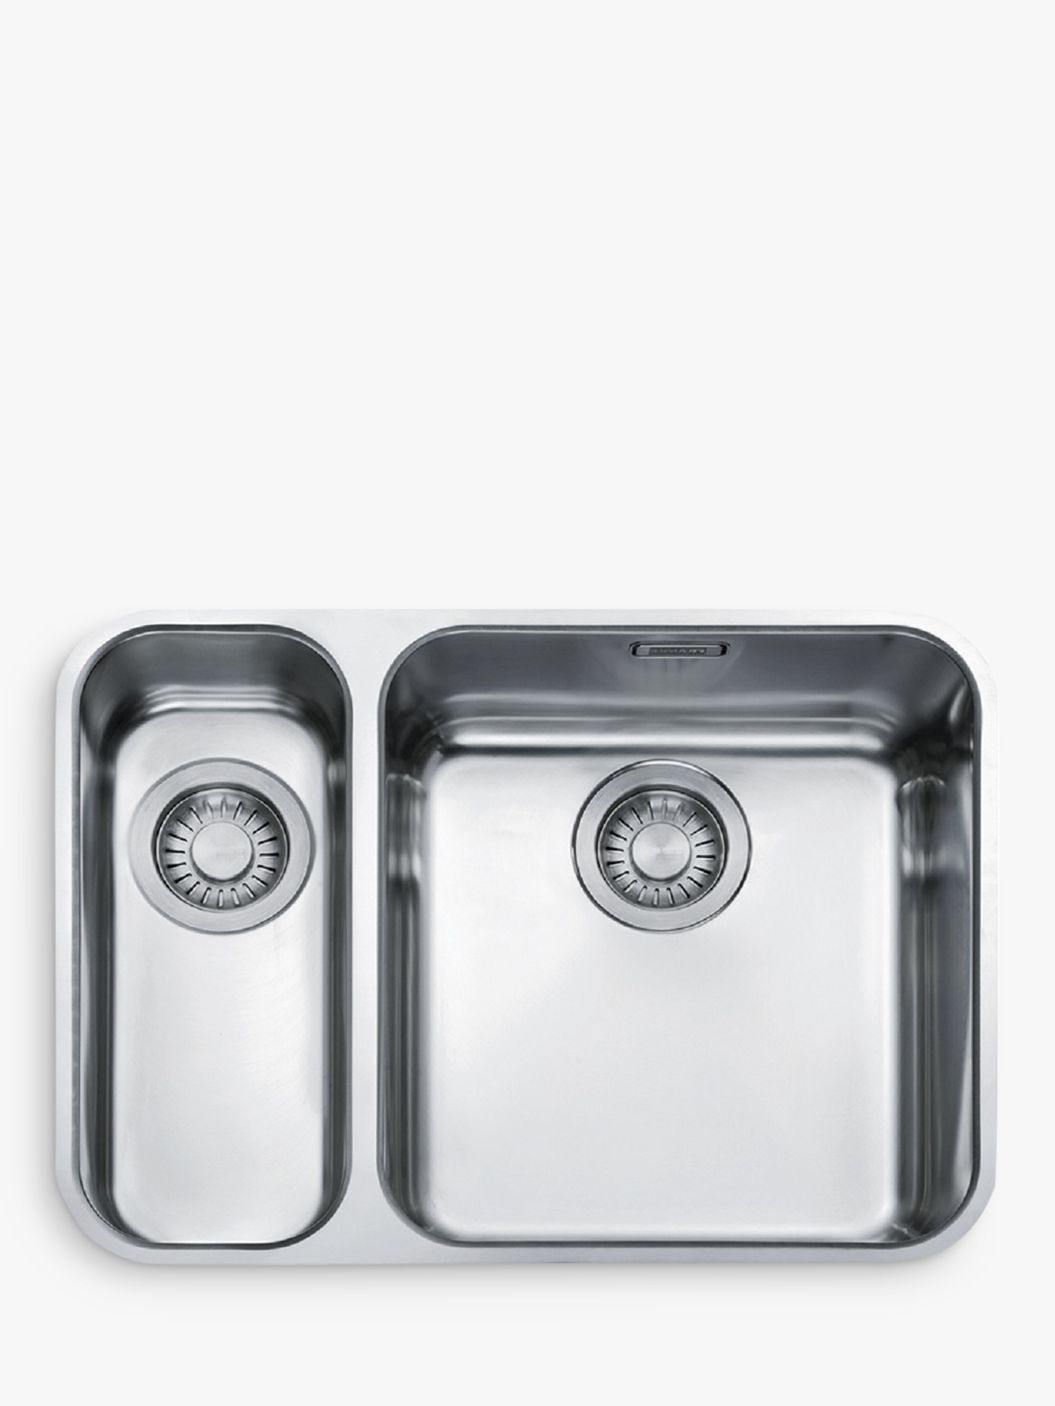 Franke Largo LAX 160 36-16 Undermounted 1.5 Bowl Kitchen Sink with Right Hand Bowl, Stainless Steel